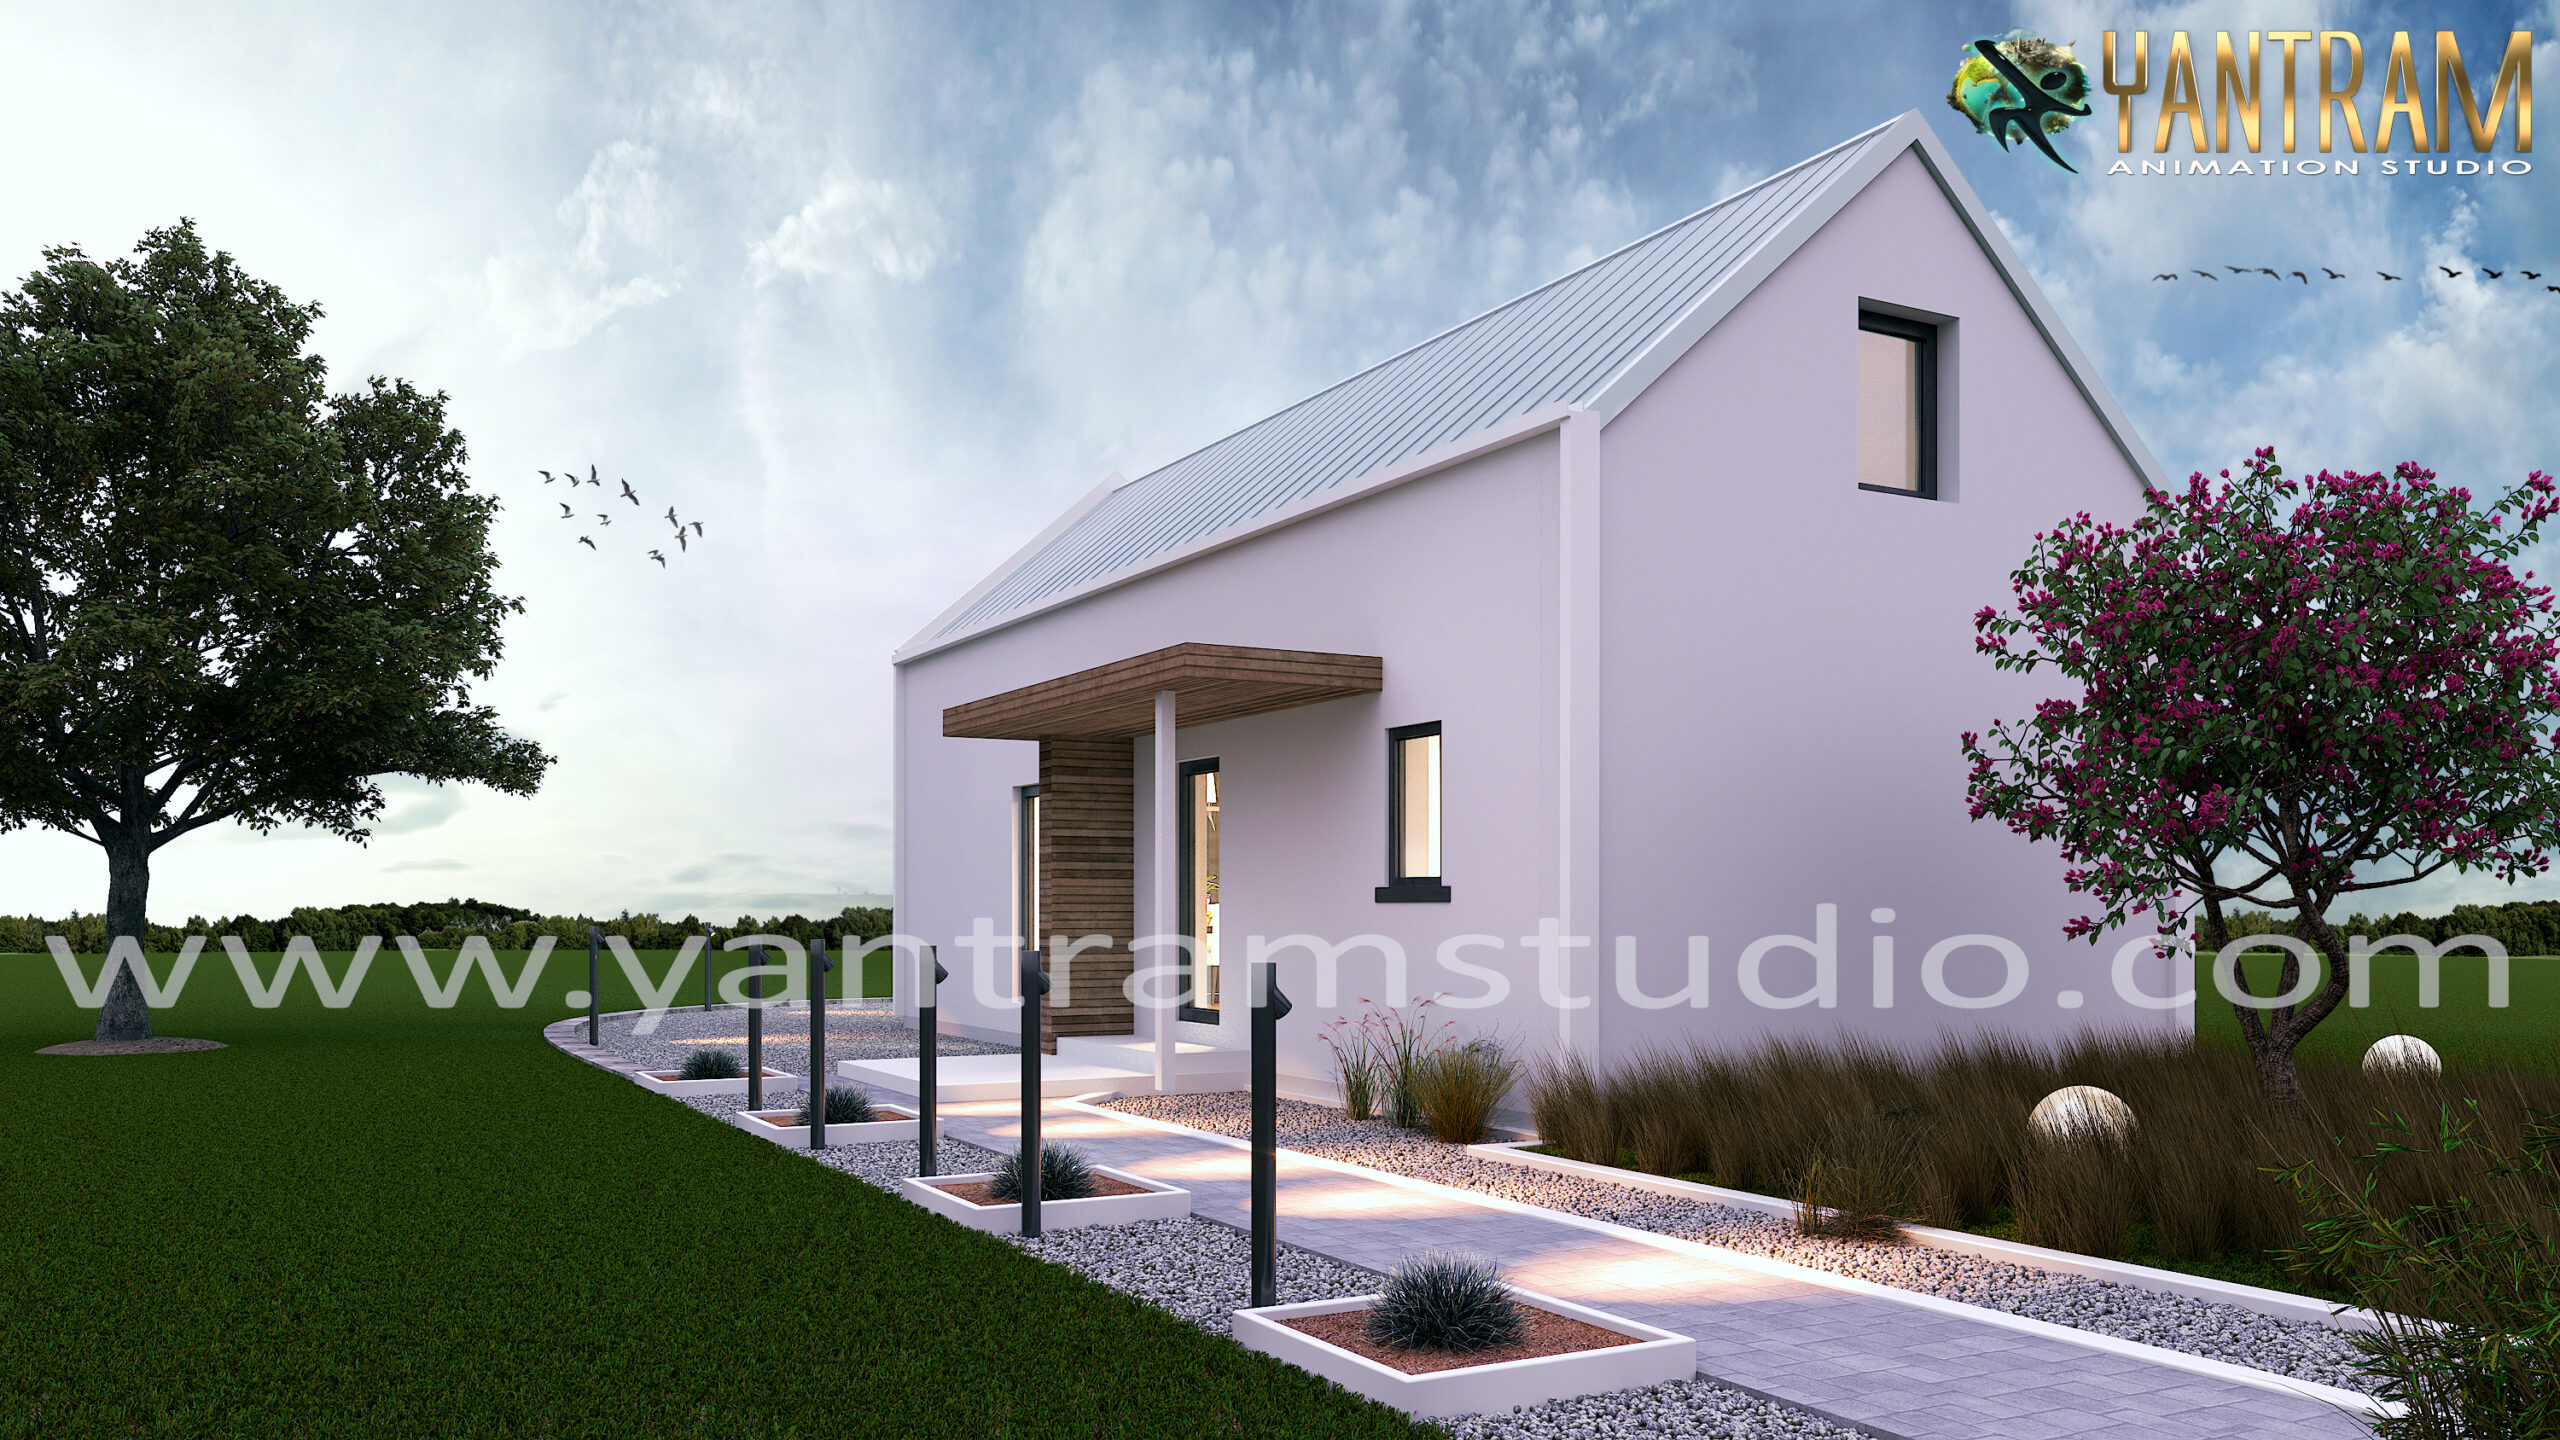 3d architectural design of Residential House with garden by Yantram architectural modeling firm, San Diego, California